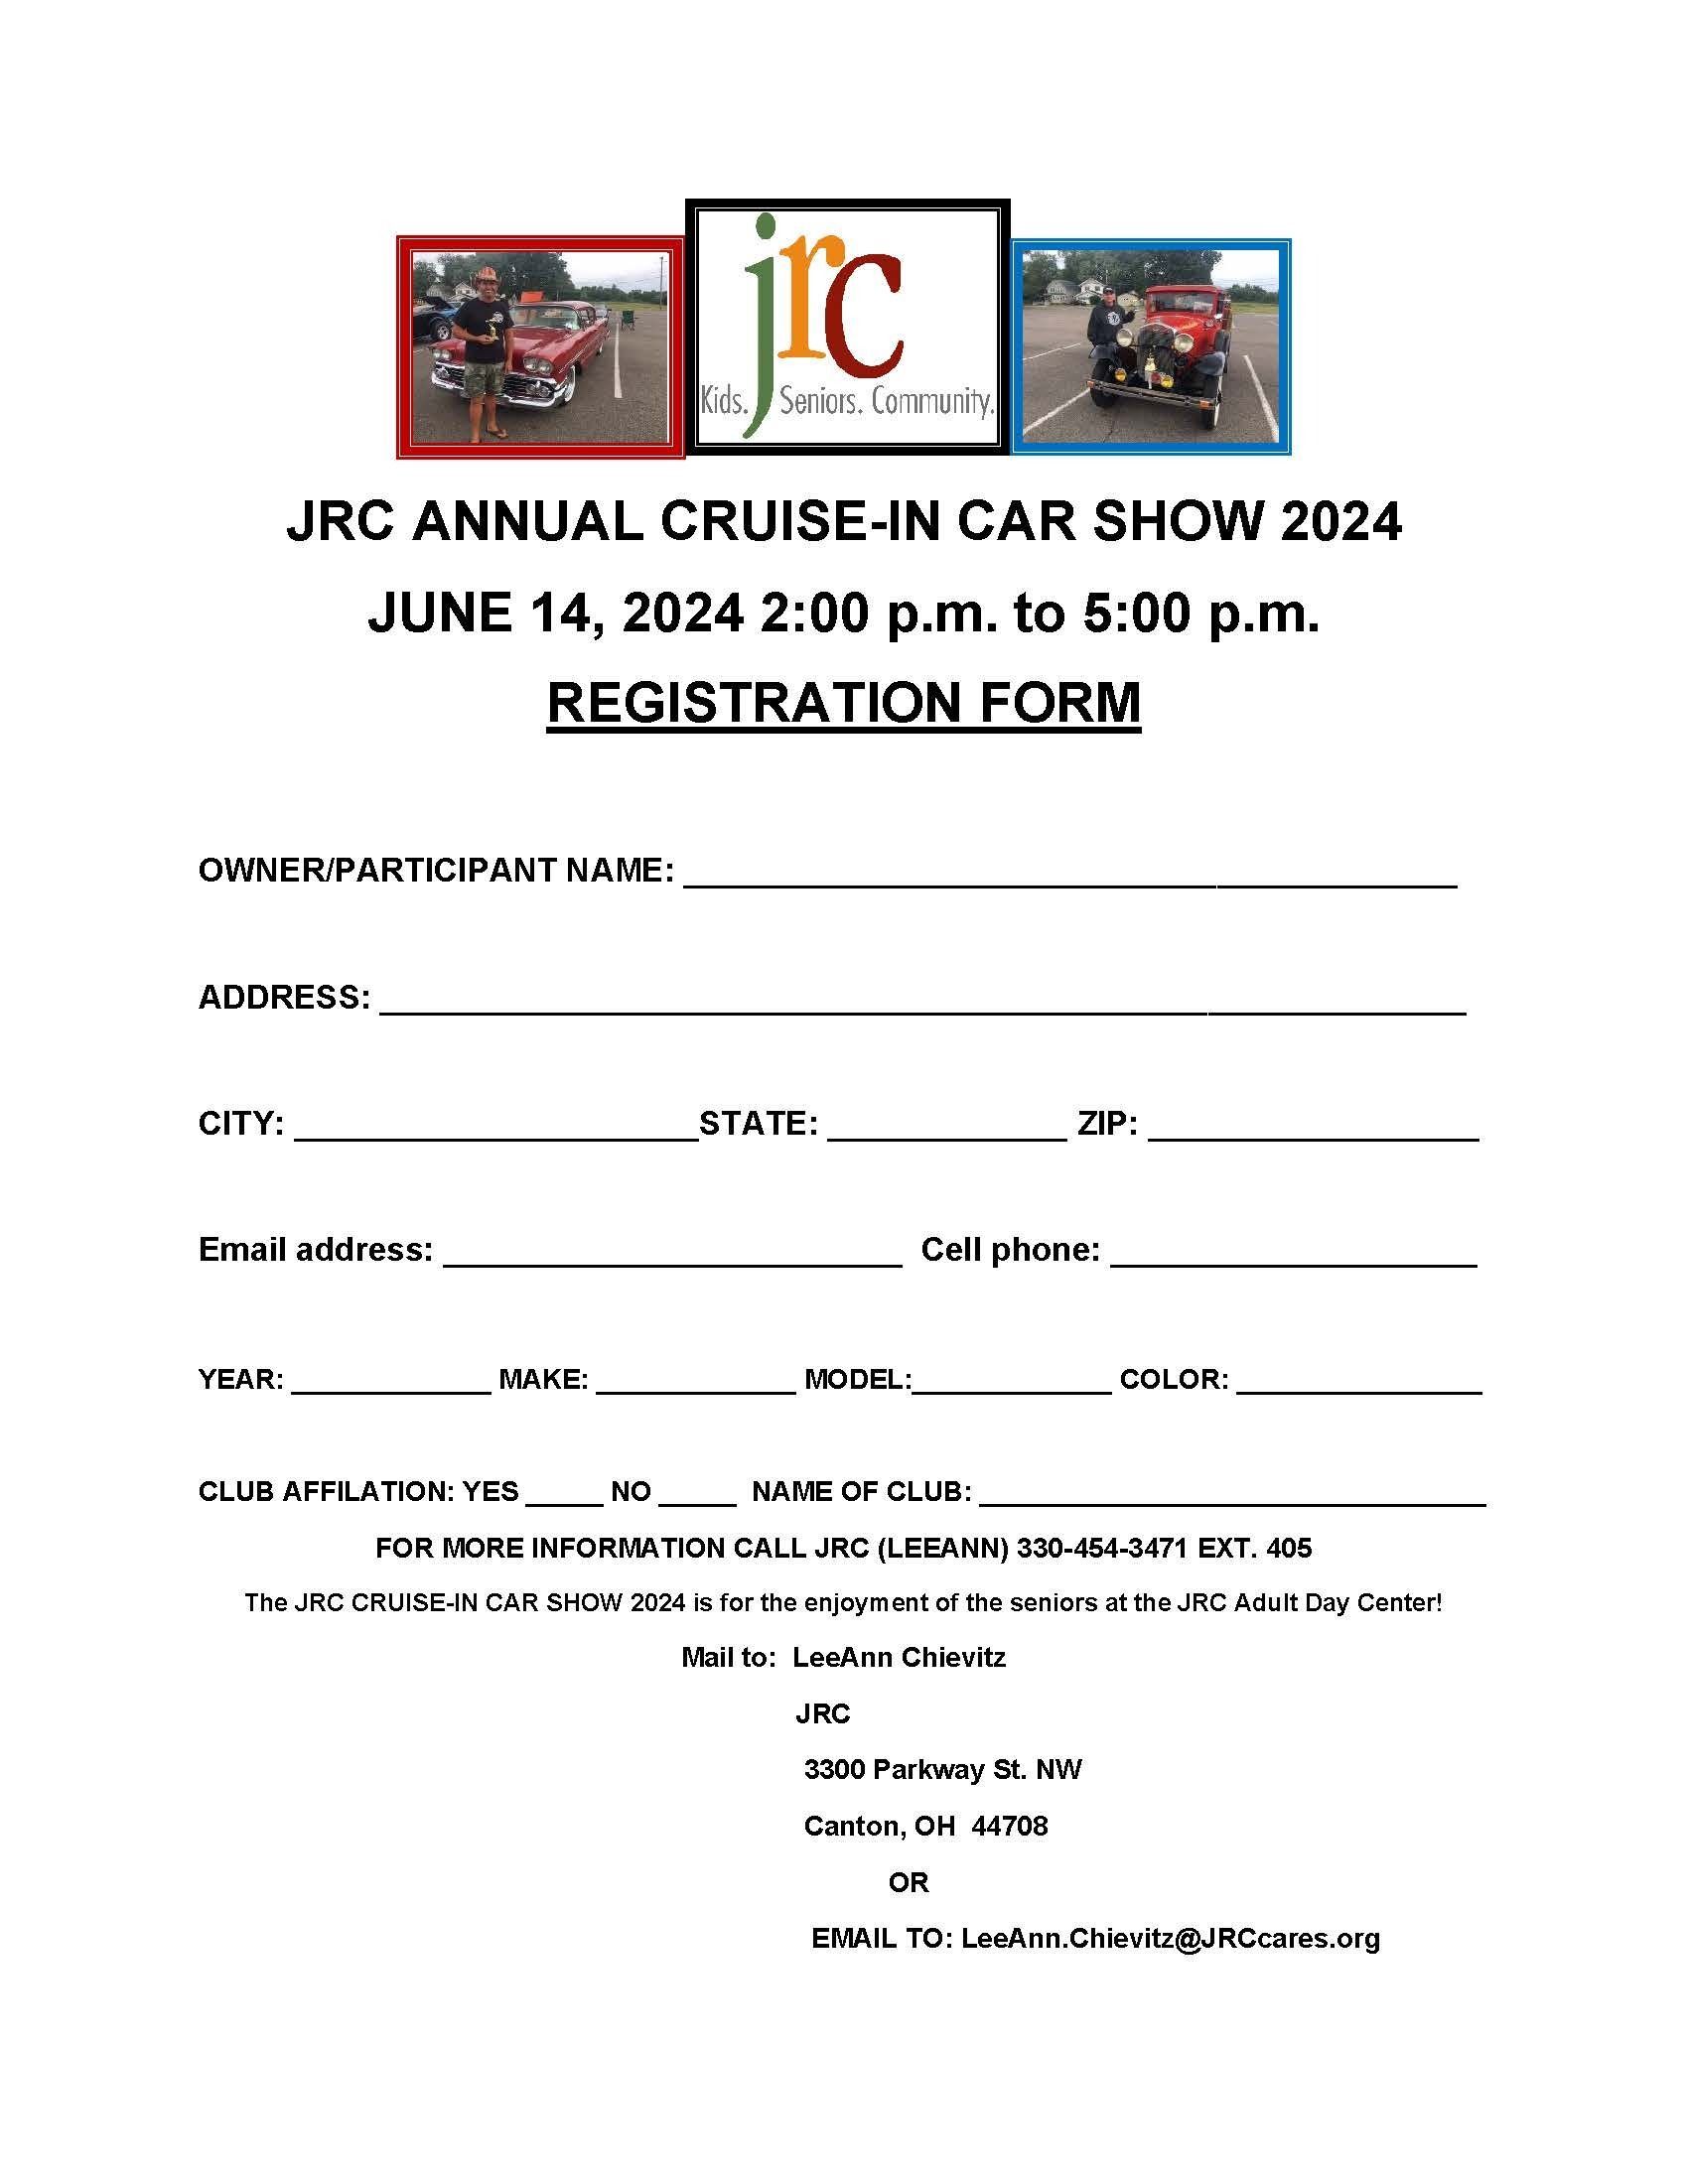 JRC Annual Cruise-In Car Show - DOWNLOAD PRINT Registration Form ABOVE